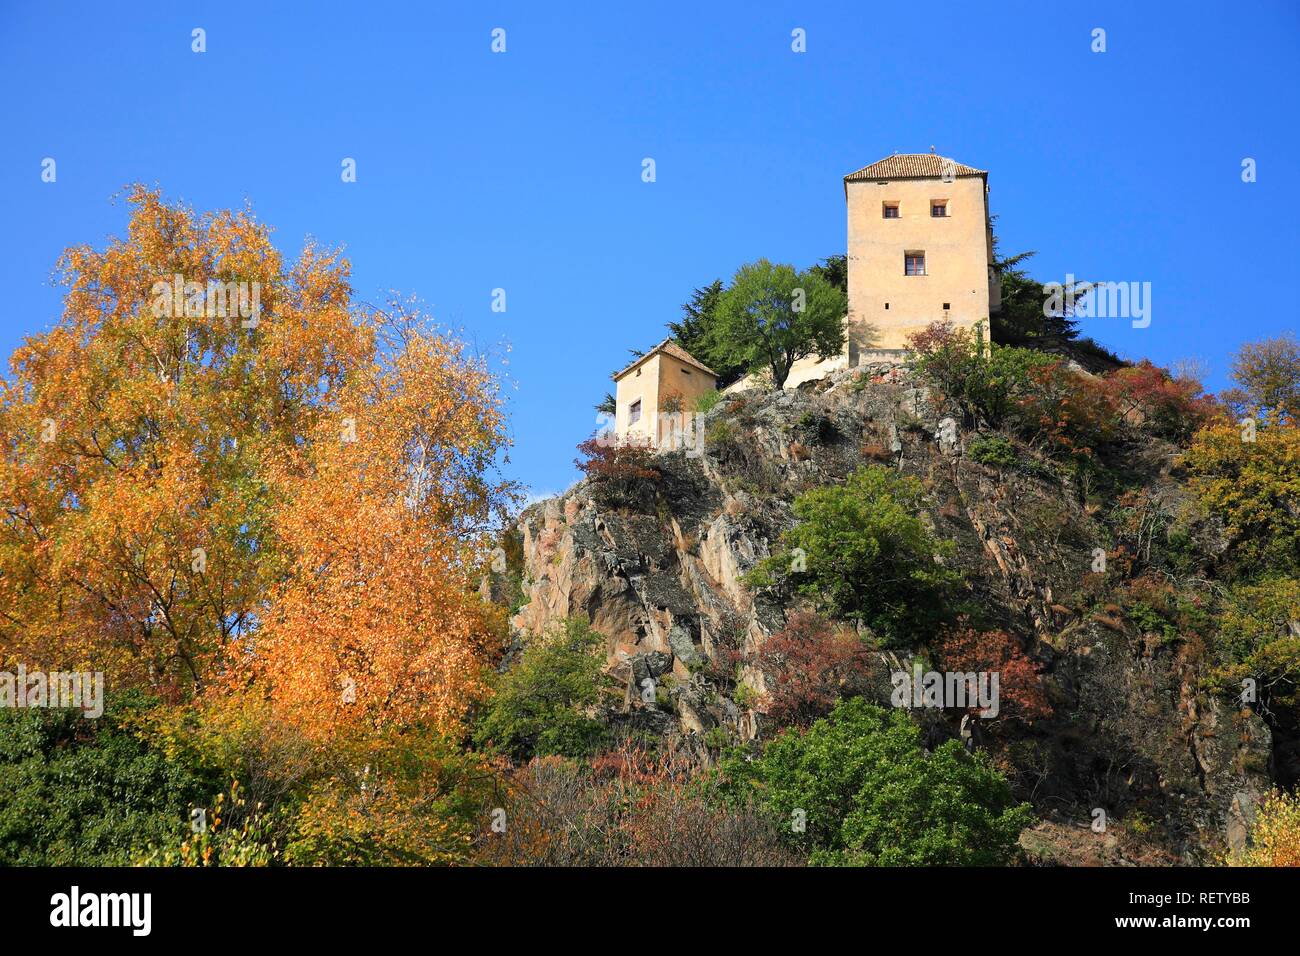 Juval Castle at the entrance to Schnalstal Valley, Vinschgau Valley, Alto Adige, Italy, Europe Stock Photo